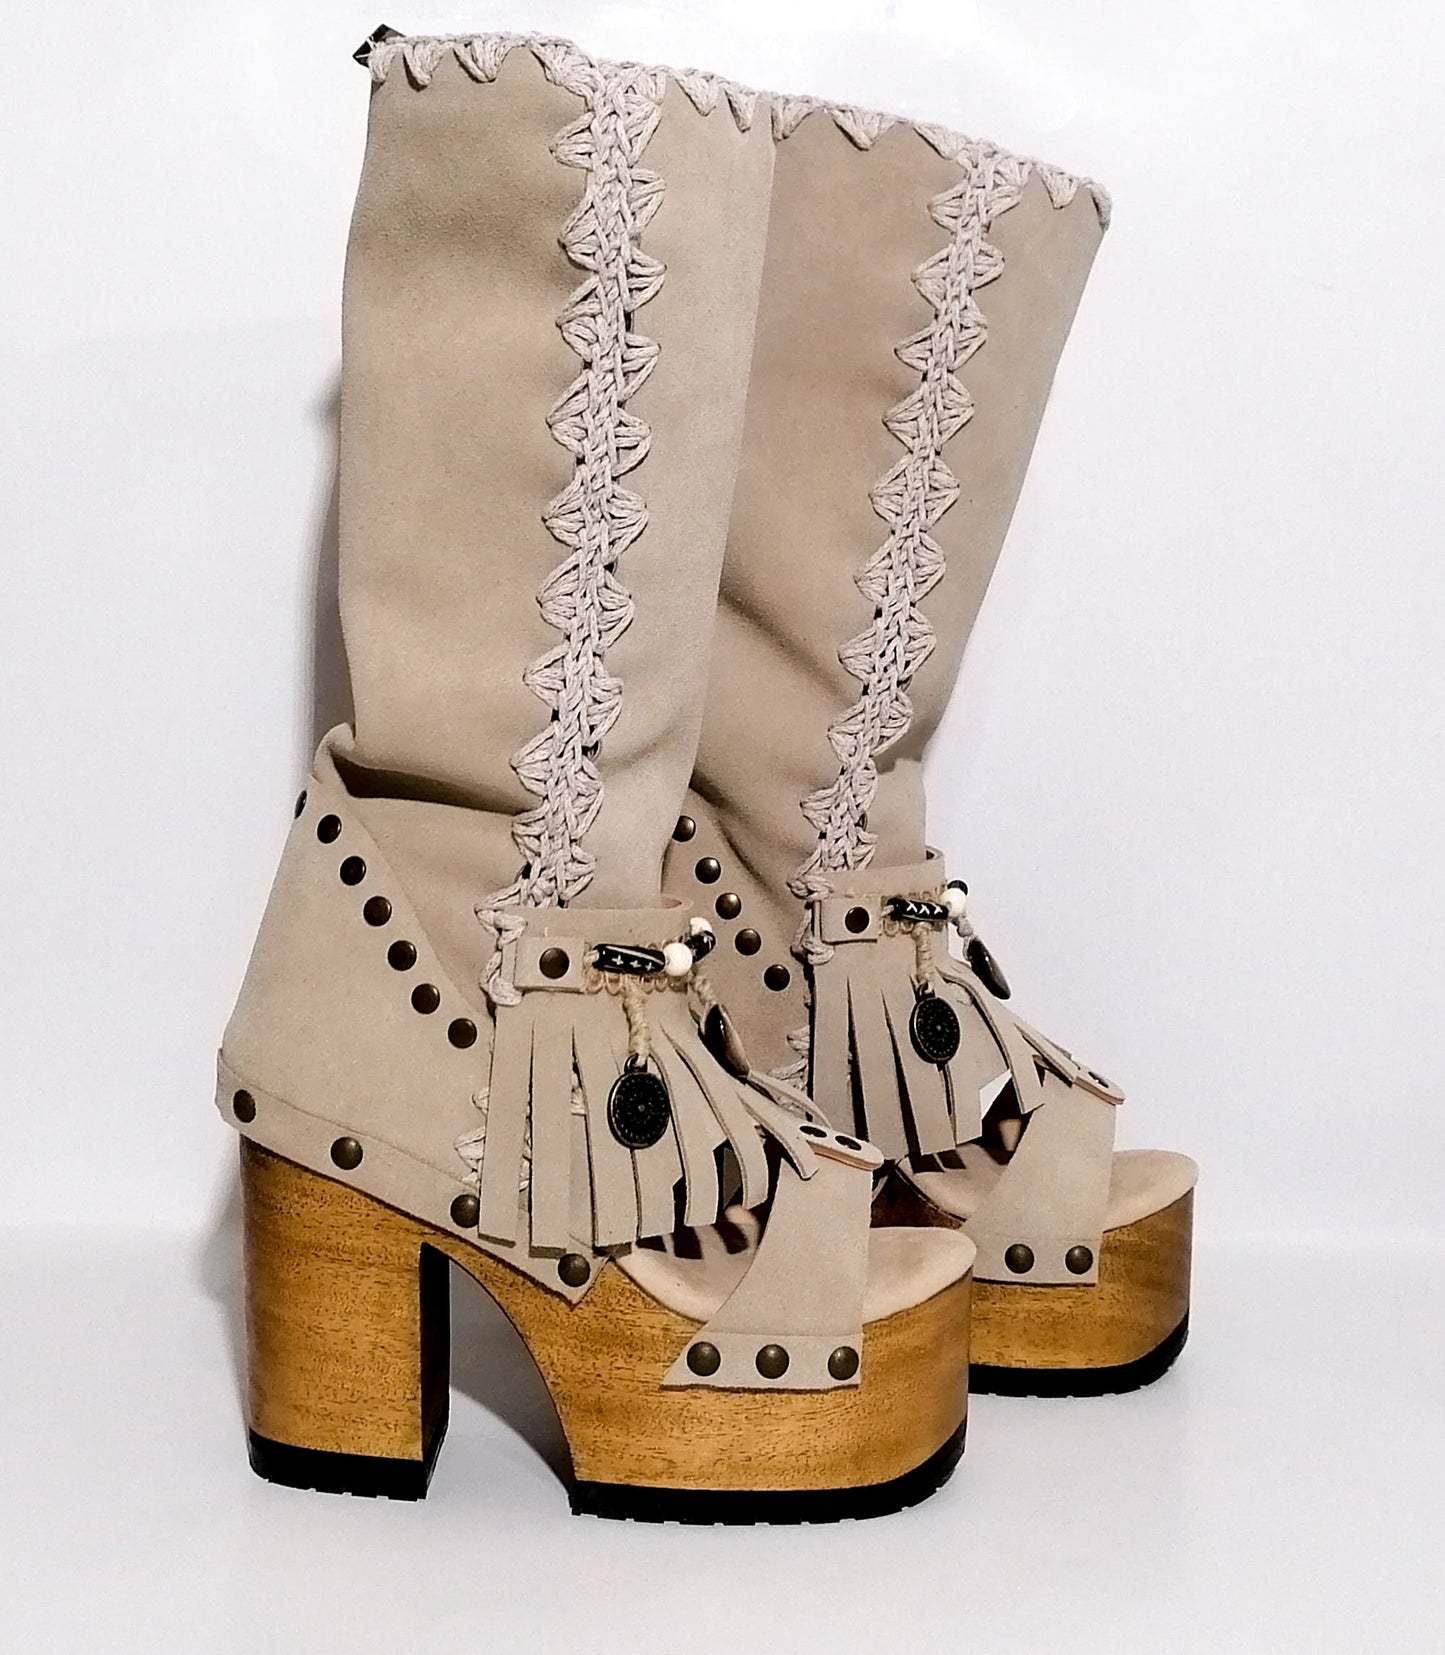 Vintage style wooden heeled clog boot. Suede leather boot decorated with fringes, natural shells, coins and carved bone with an authentic bohemian style. Boho style boots. Sizes 34 to 47. Handmade leather footwear by sol Caleyo.